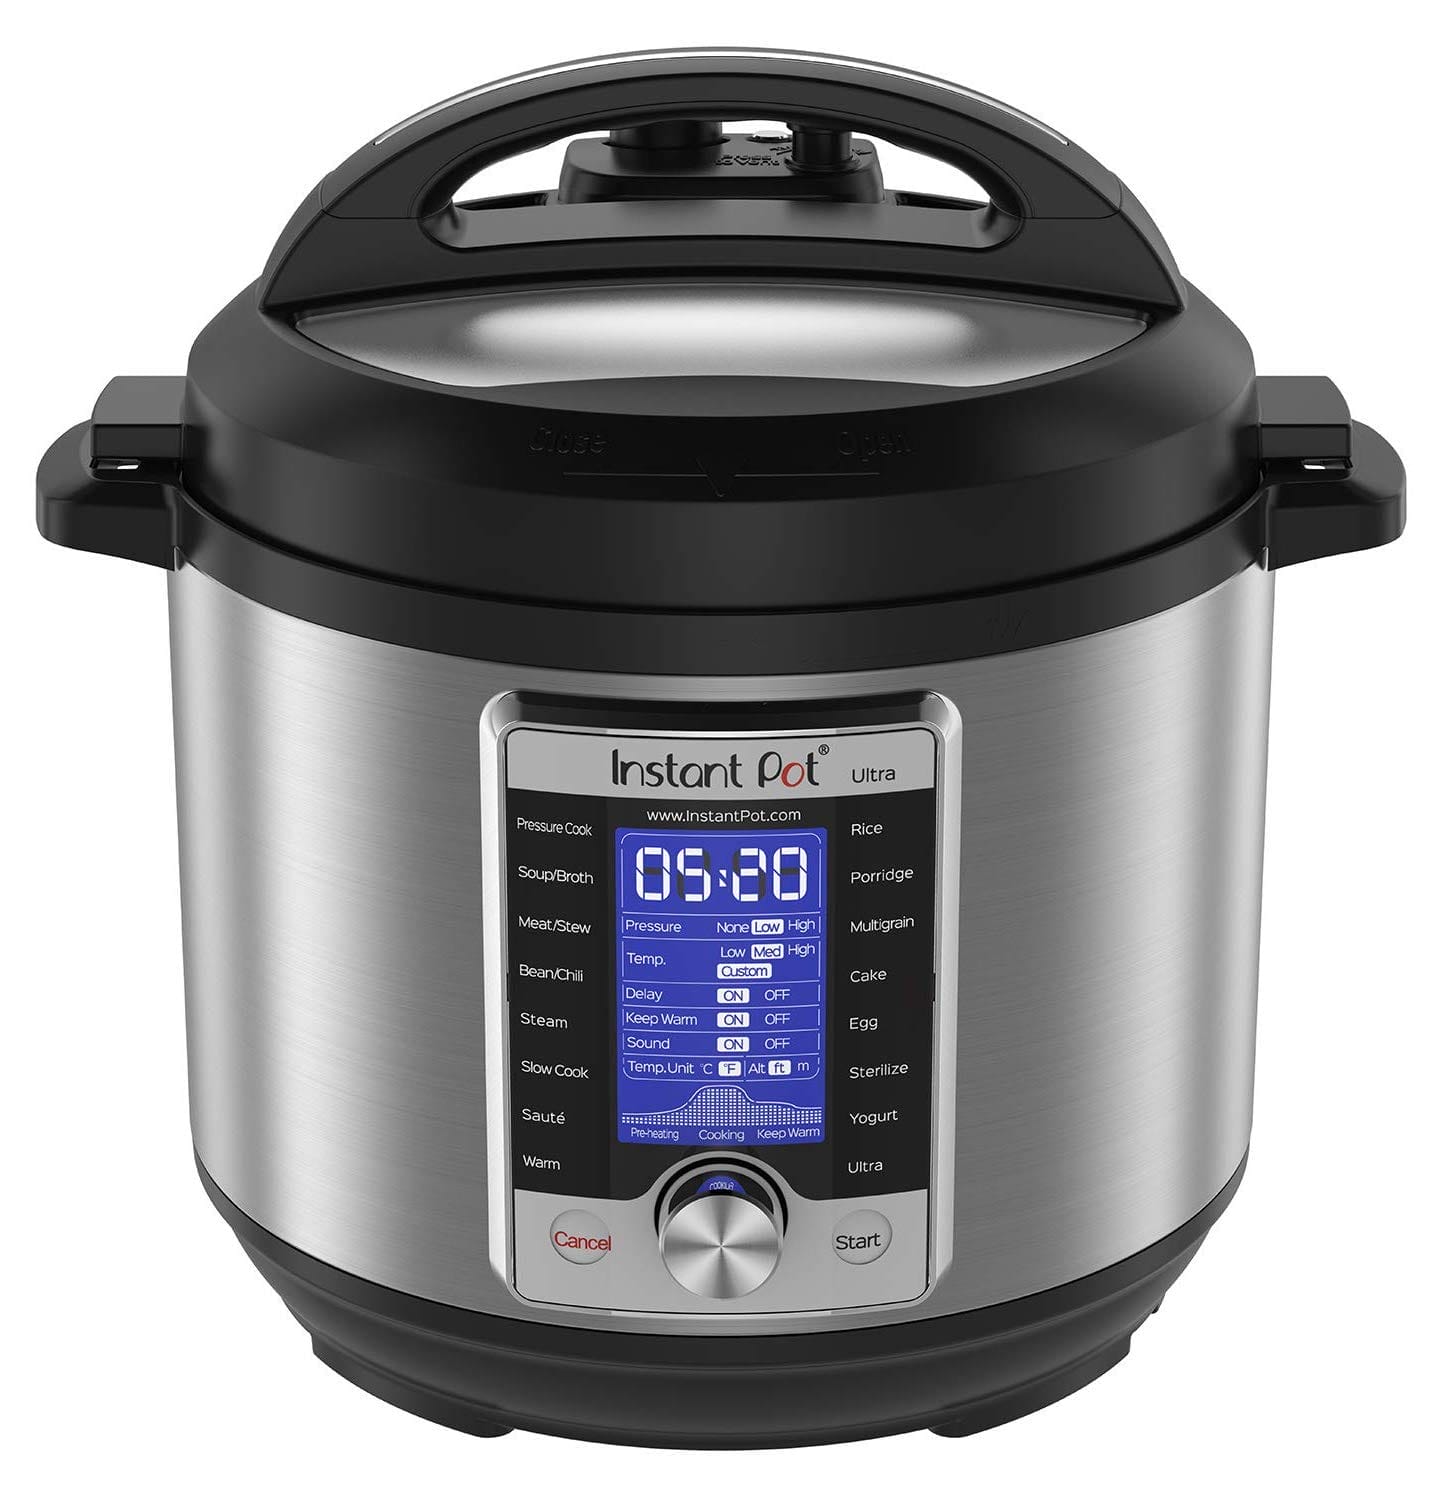 10 best stainless steel pressure cookers tested reviewed 1145 21 2